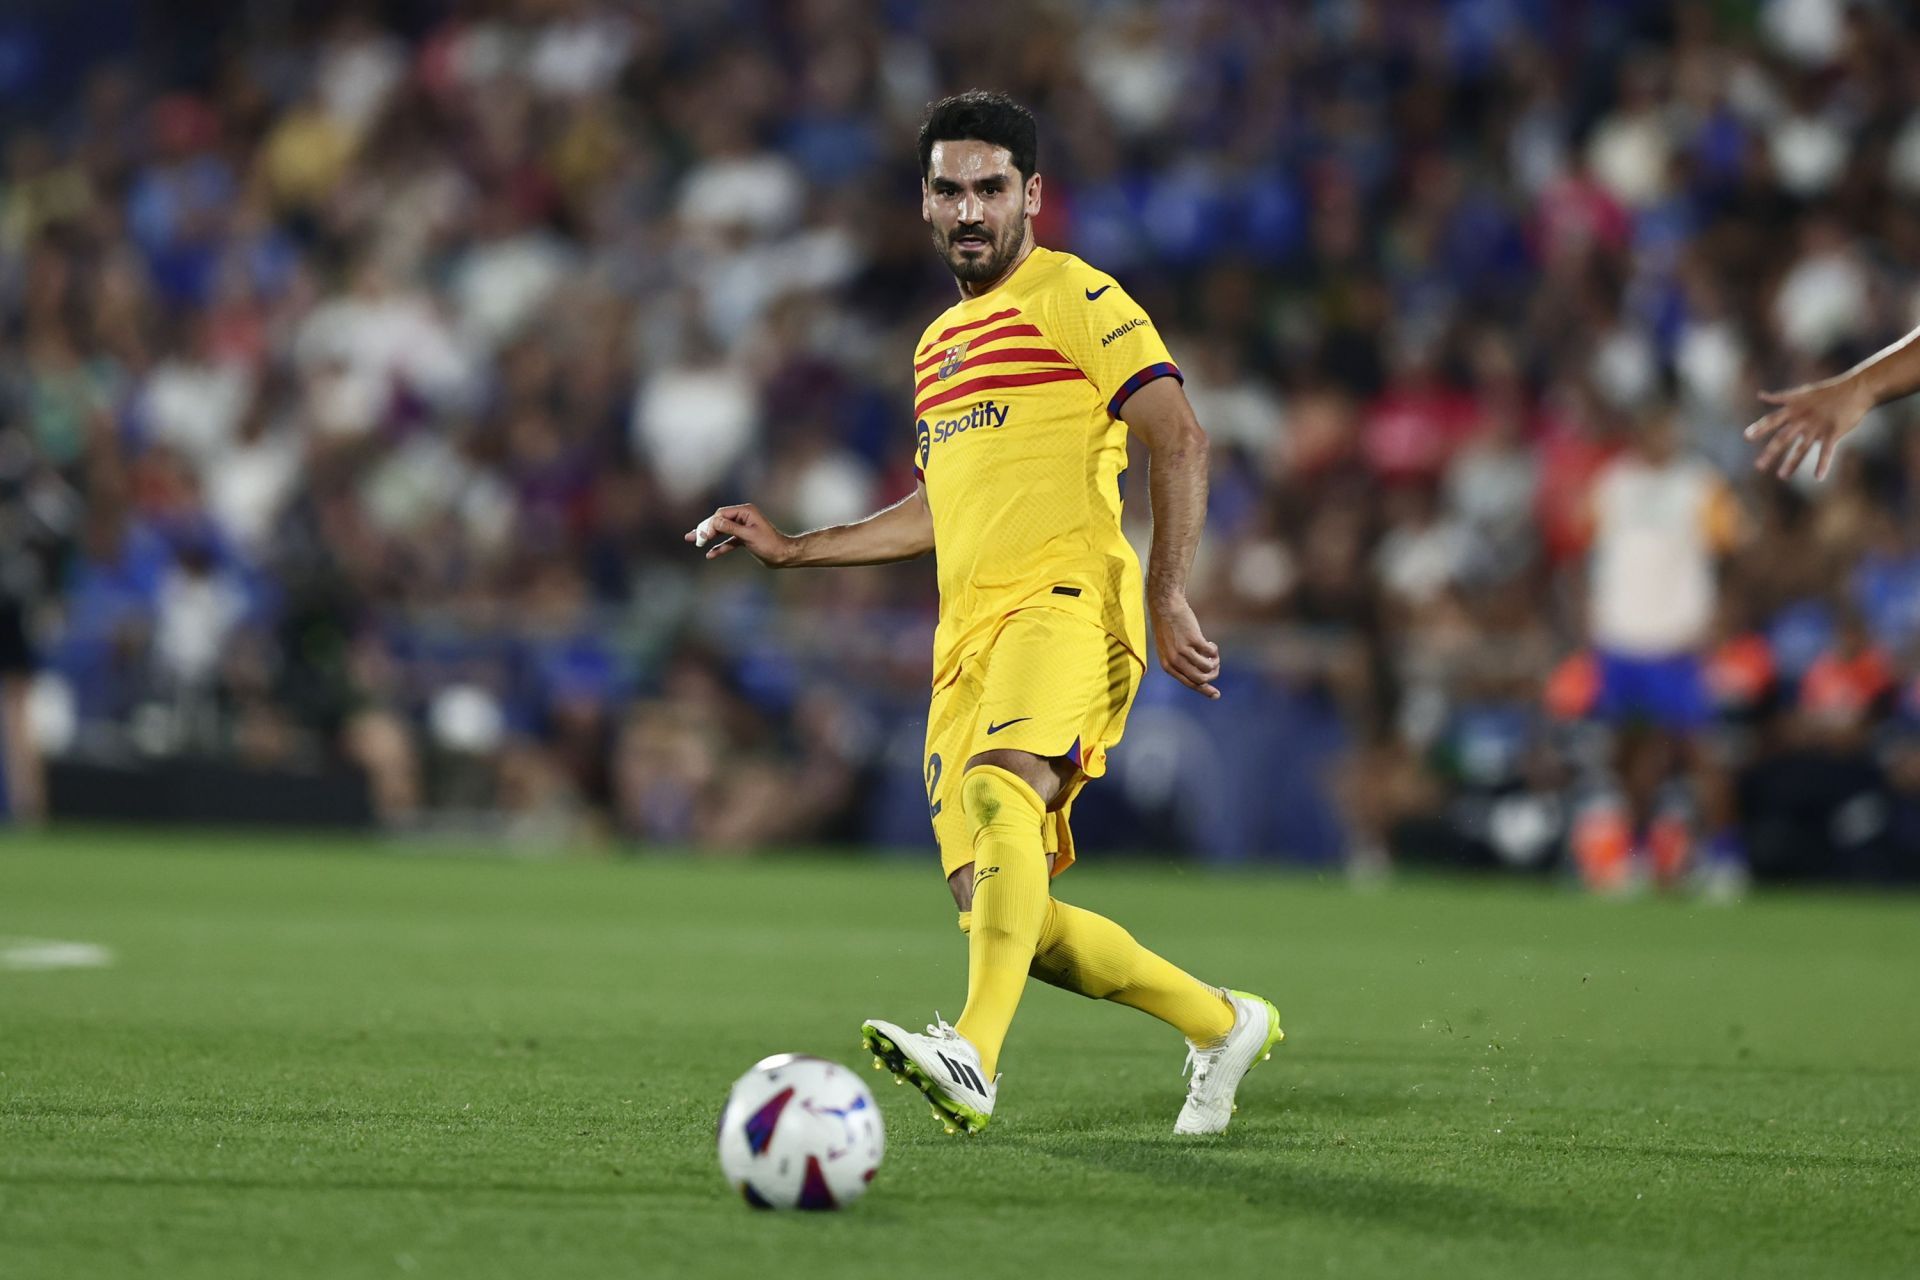 Ilkay Gundogan left Manchester City to arrive at the Camp Nou this summer.